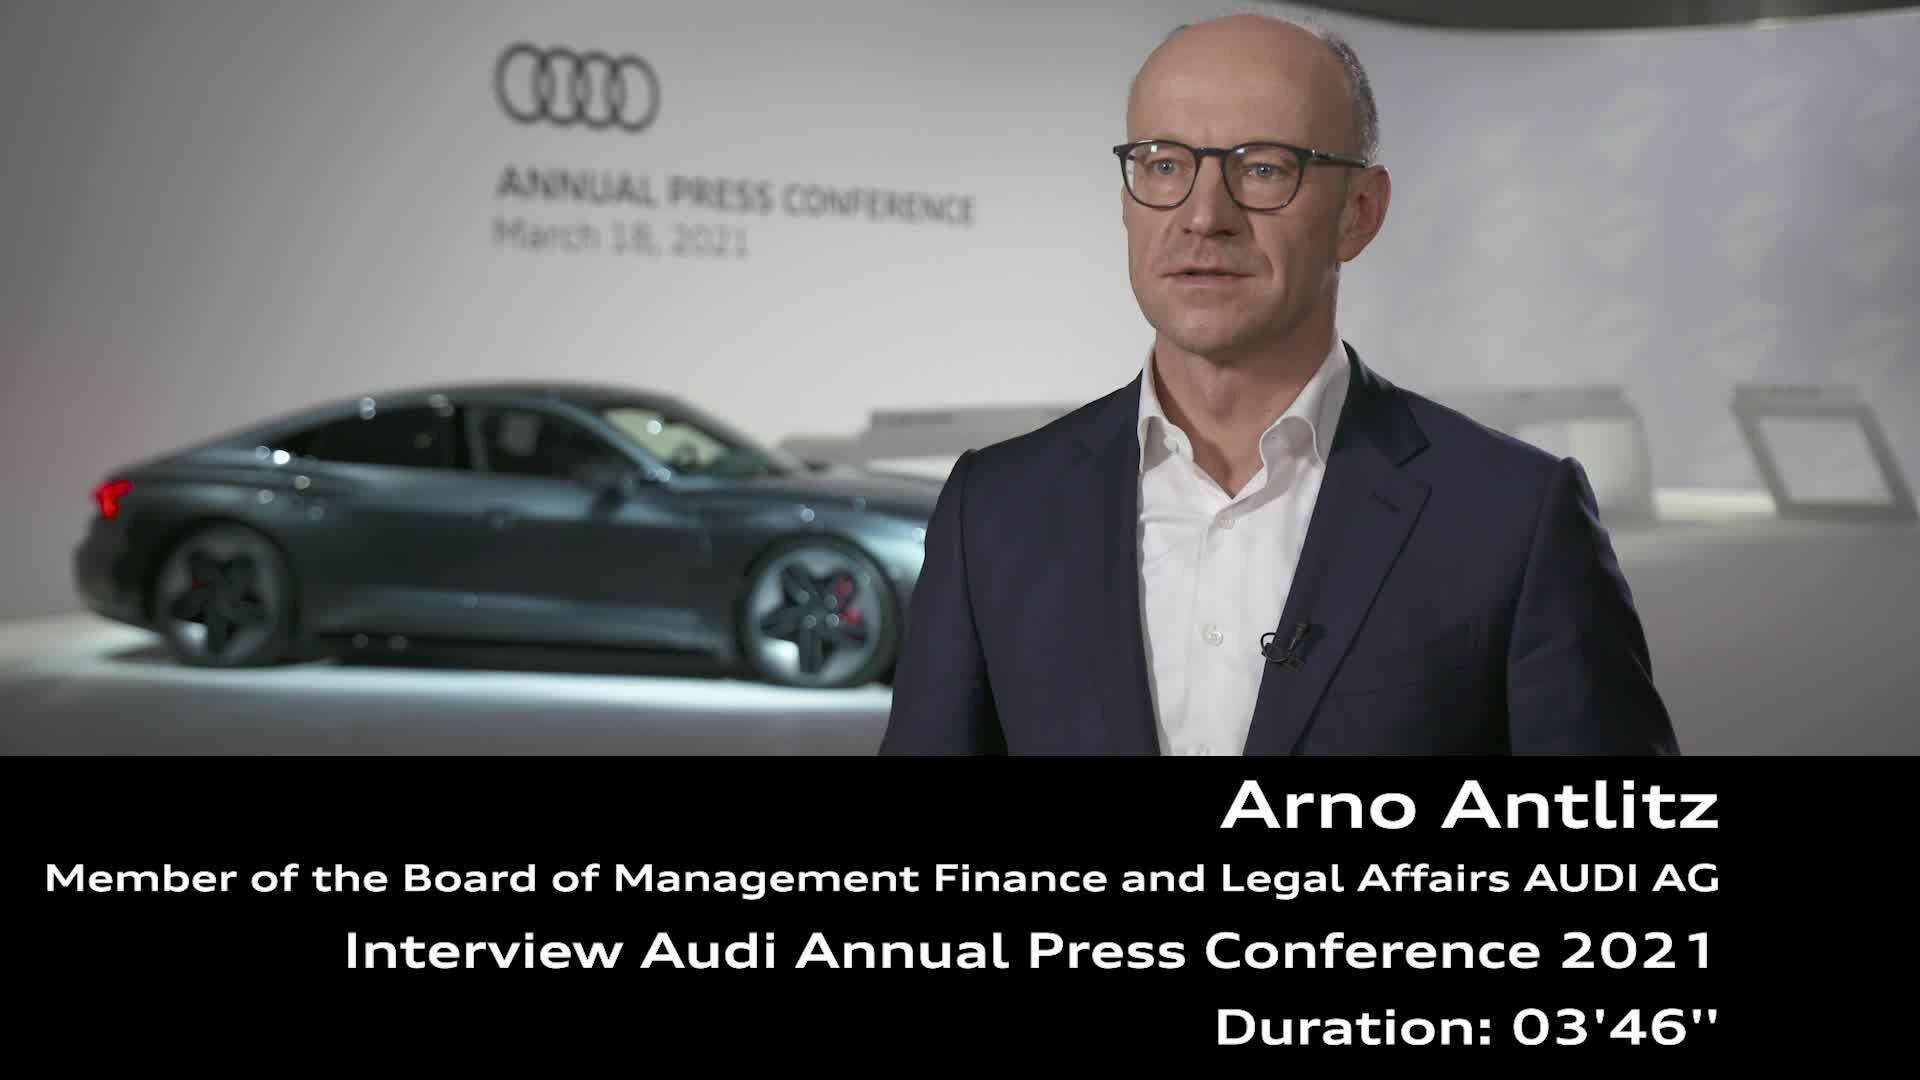 Interview: Arno Antlitz on the occasion of the Audi Annual Press Conference 2021